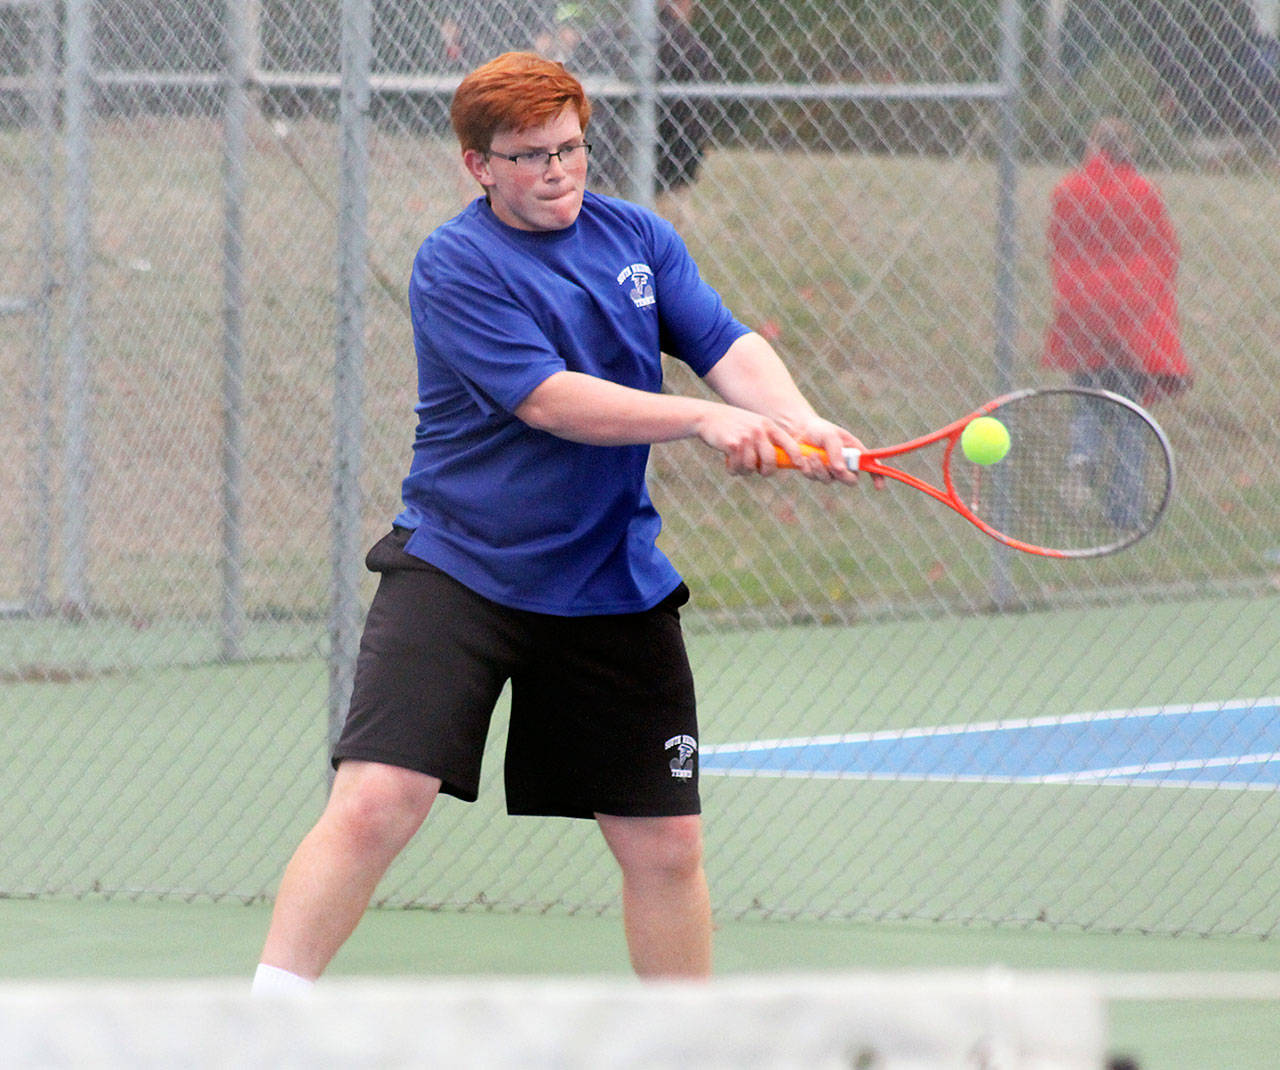 Brent de Wolf is one of only three returning varsity players for the South Whidbey tennis team. (File photo)